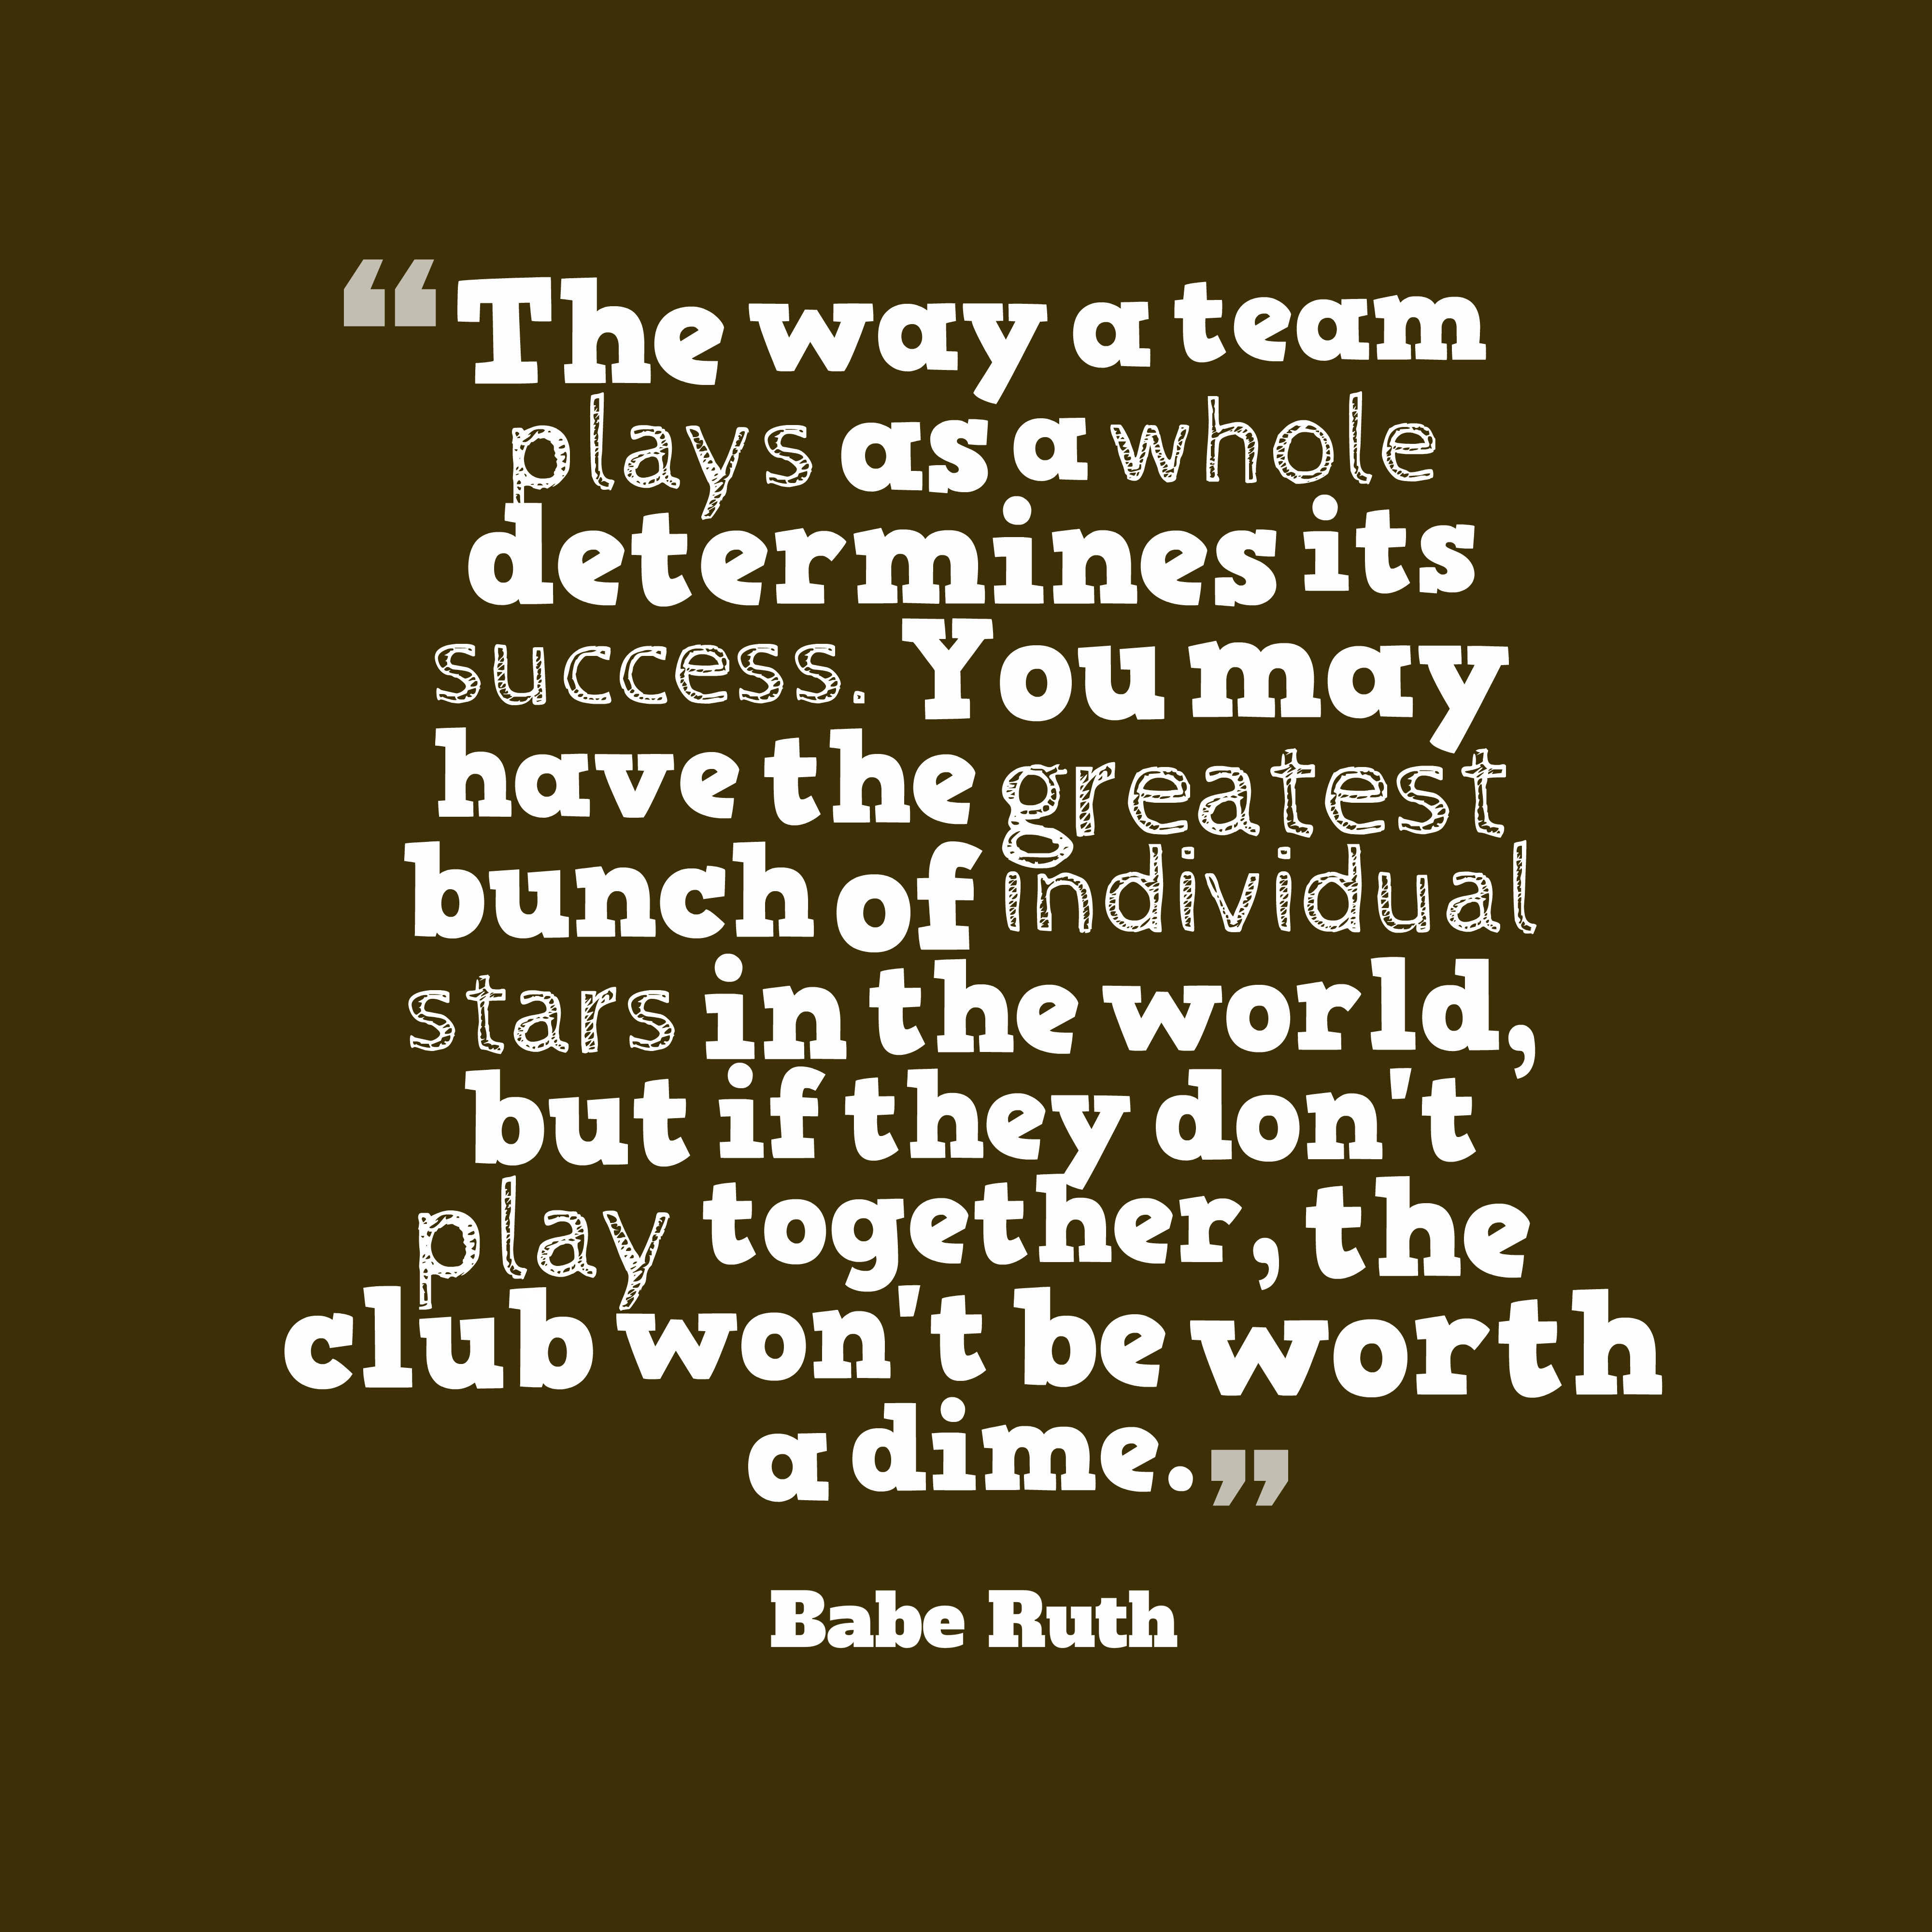 The way a team plays as a whole determines its success. You may have the greatest bunch of individual stars in the world, but if they don’t play together, the club won’t be worth a dime. babe ruth